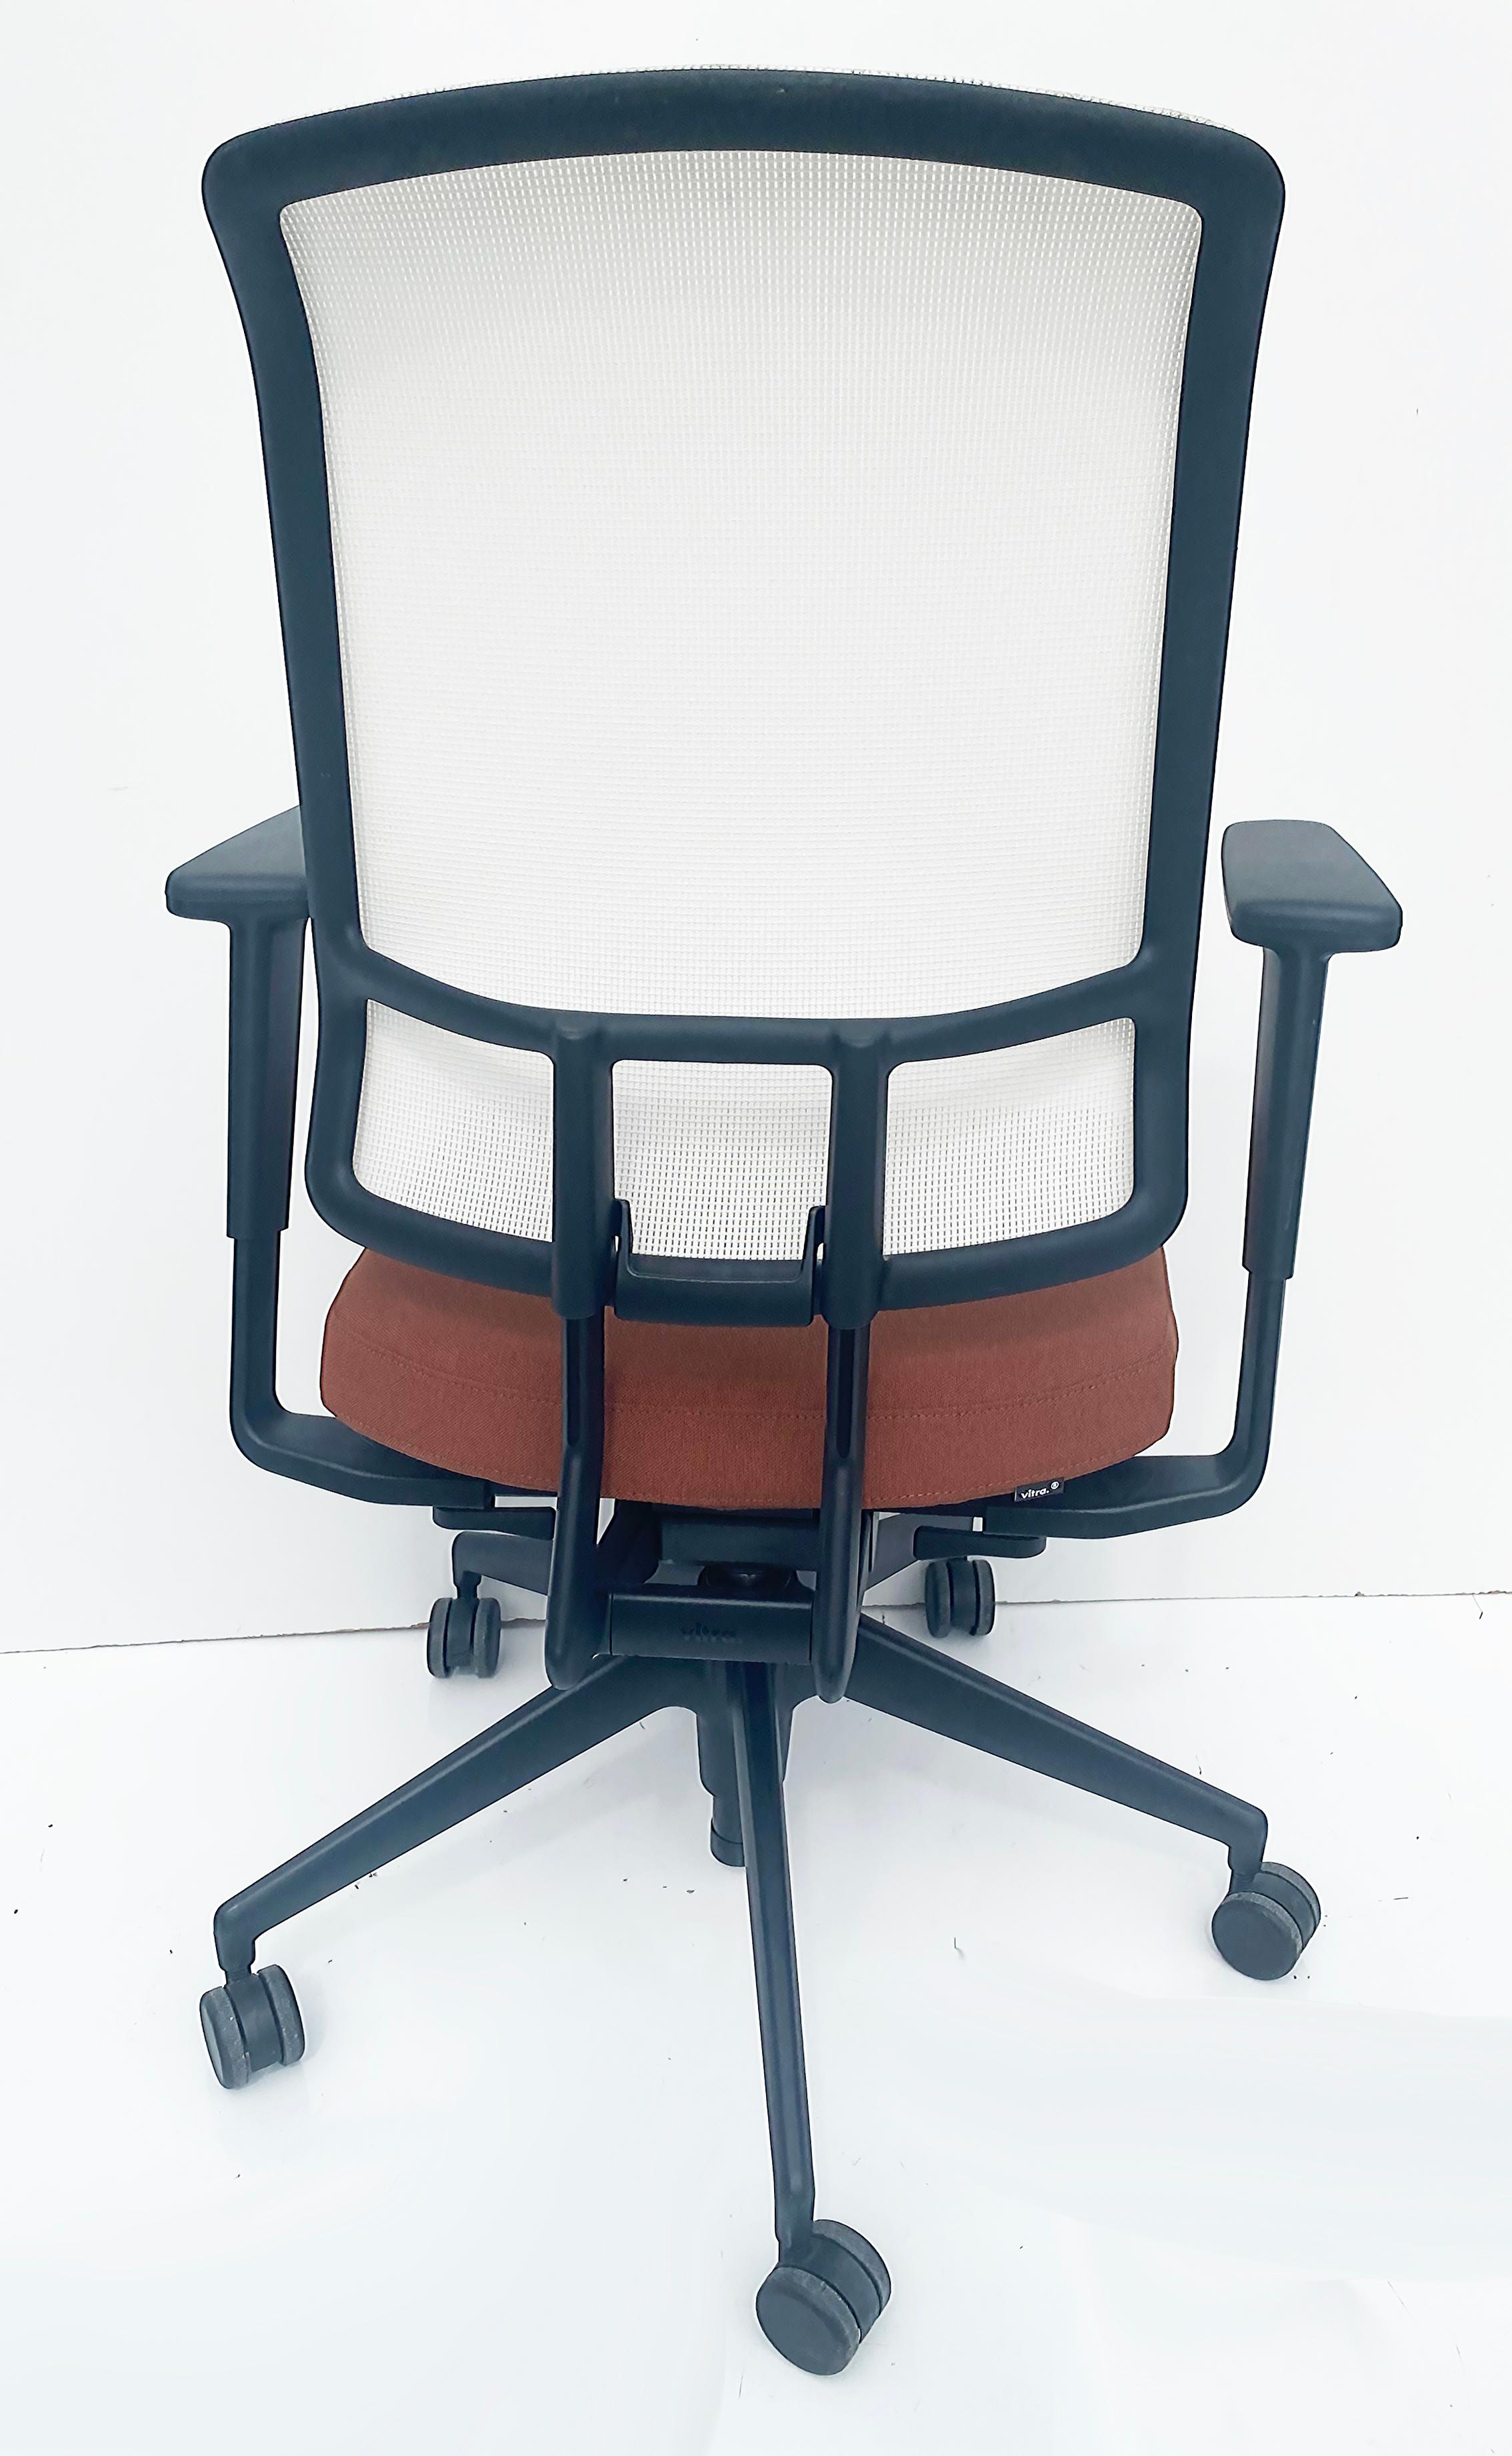 Vitra AM Fully Adjustable Ergonomic Office Chairs by Alberto Meda 2021 For Sale 2